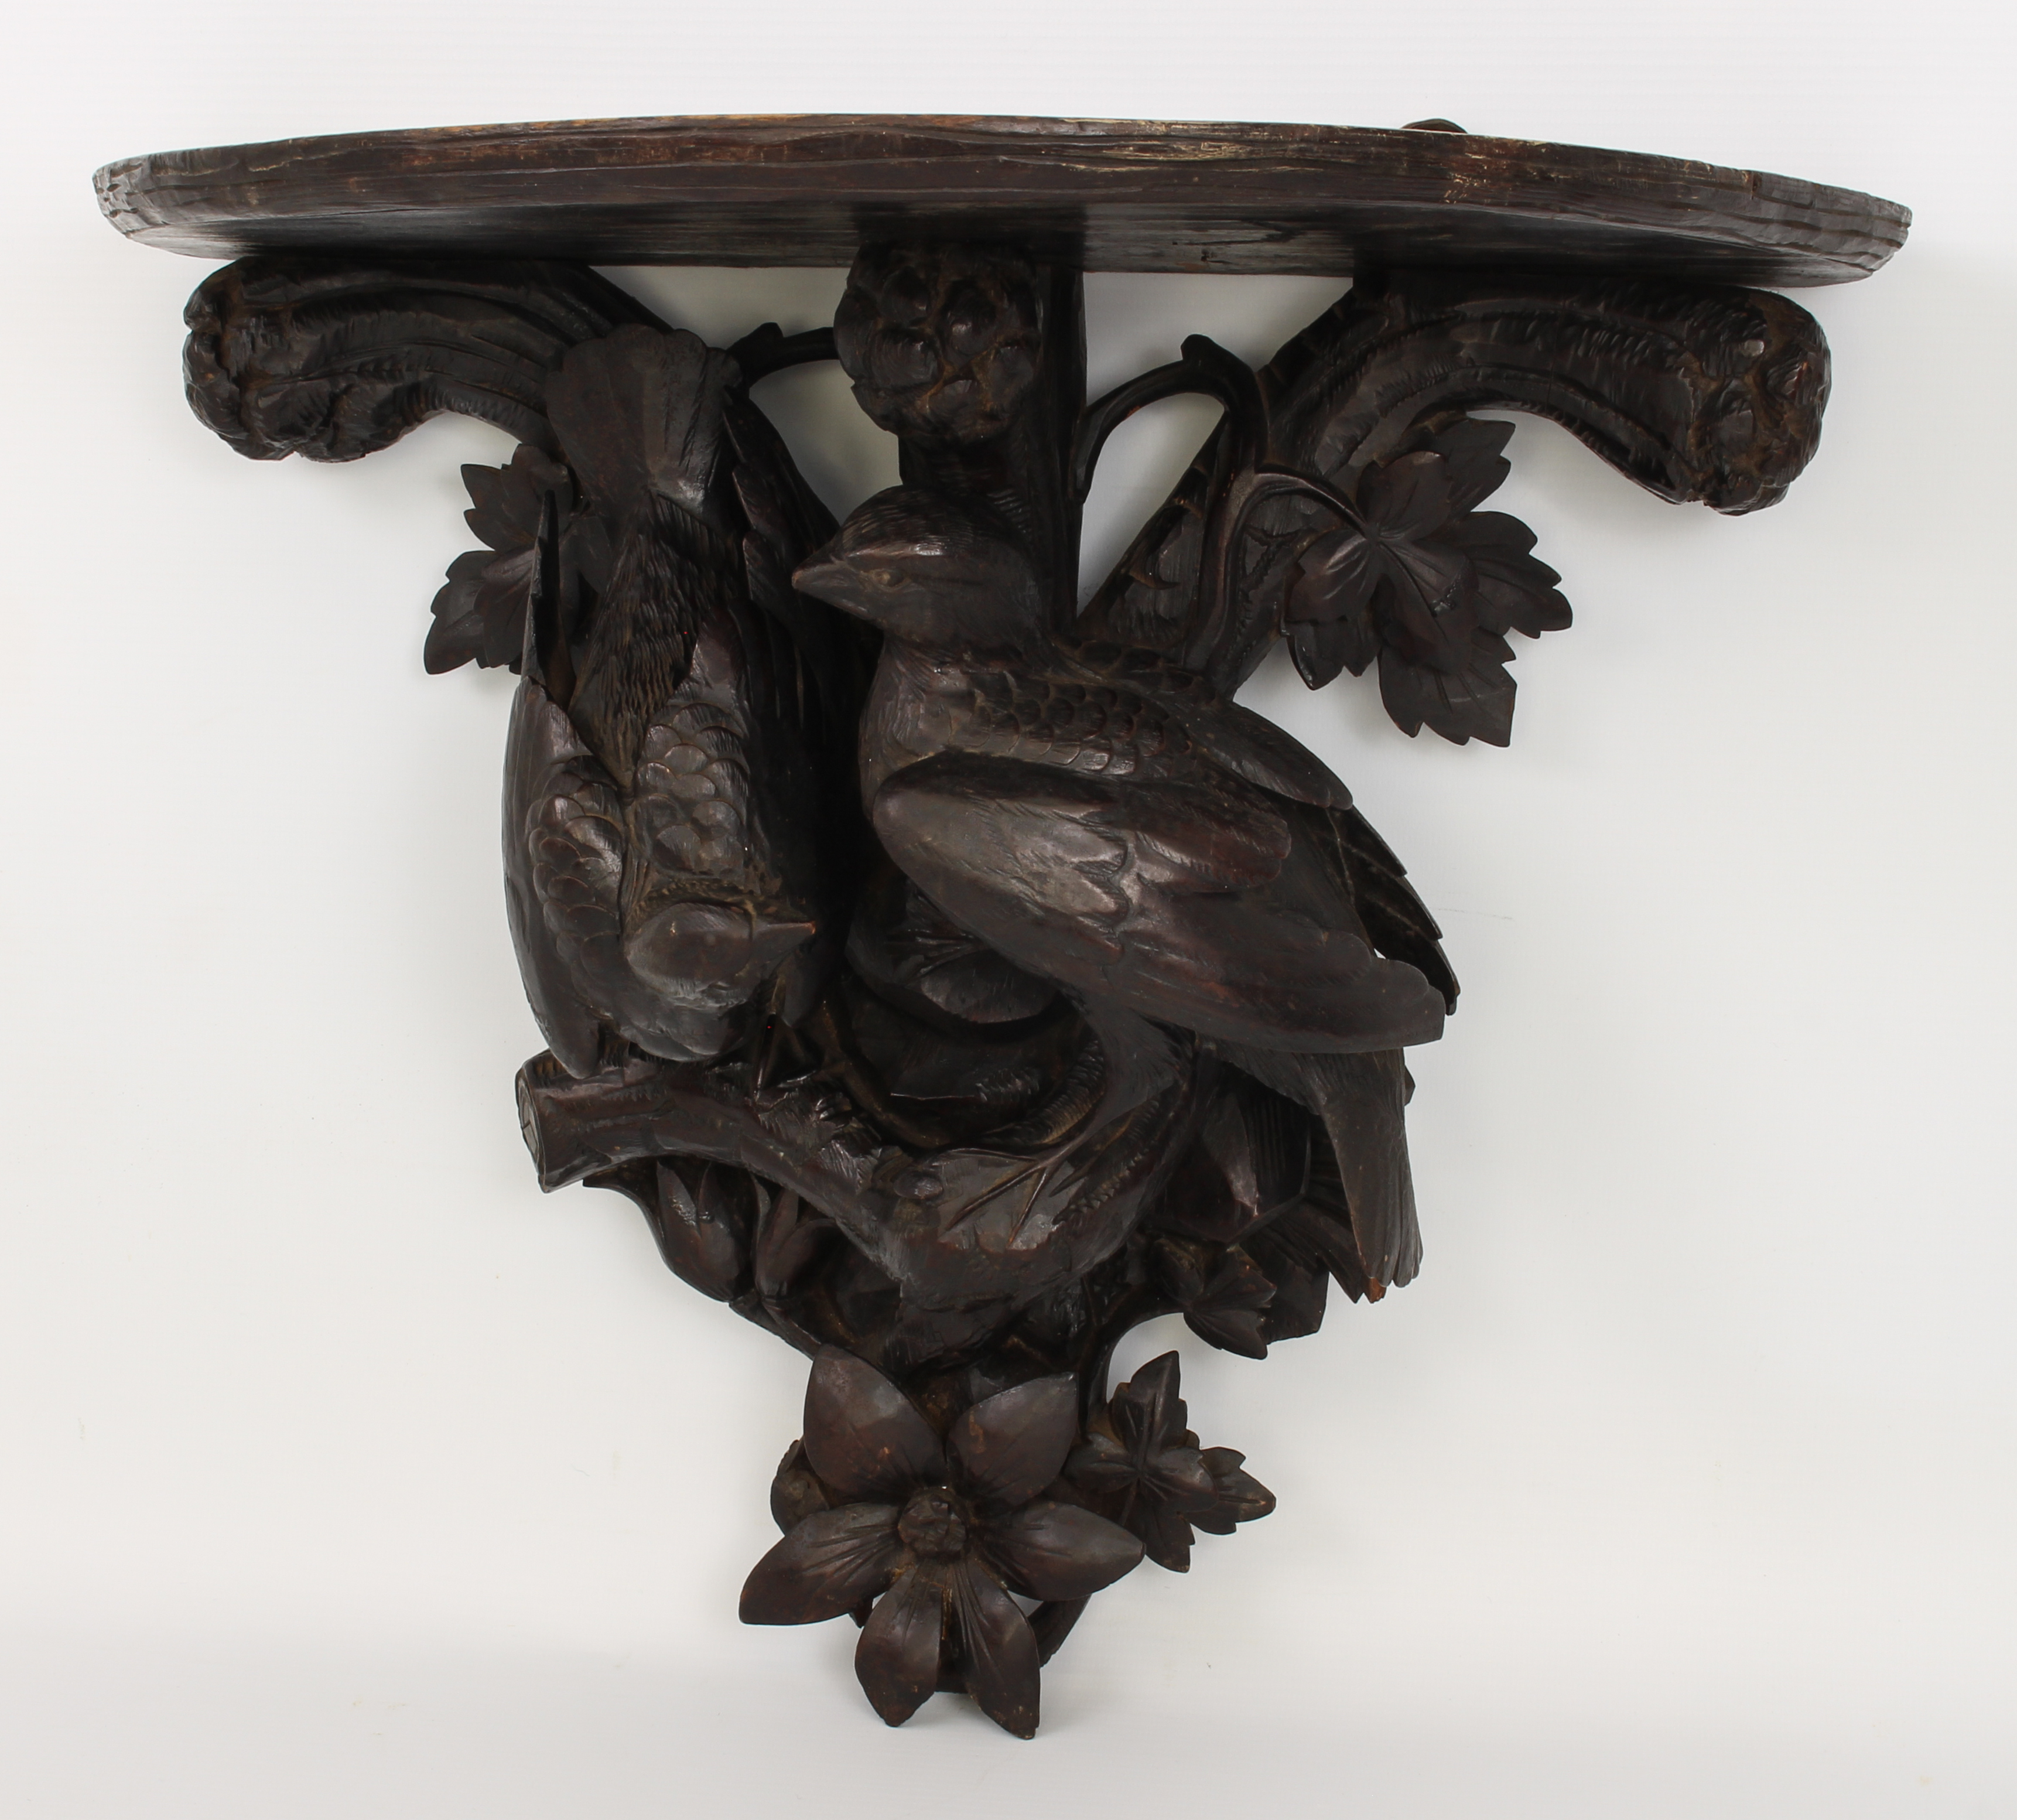 A late 19th century French carved and ebonised wooden clock bracket - probably lime wood, the demi-